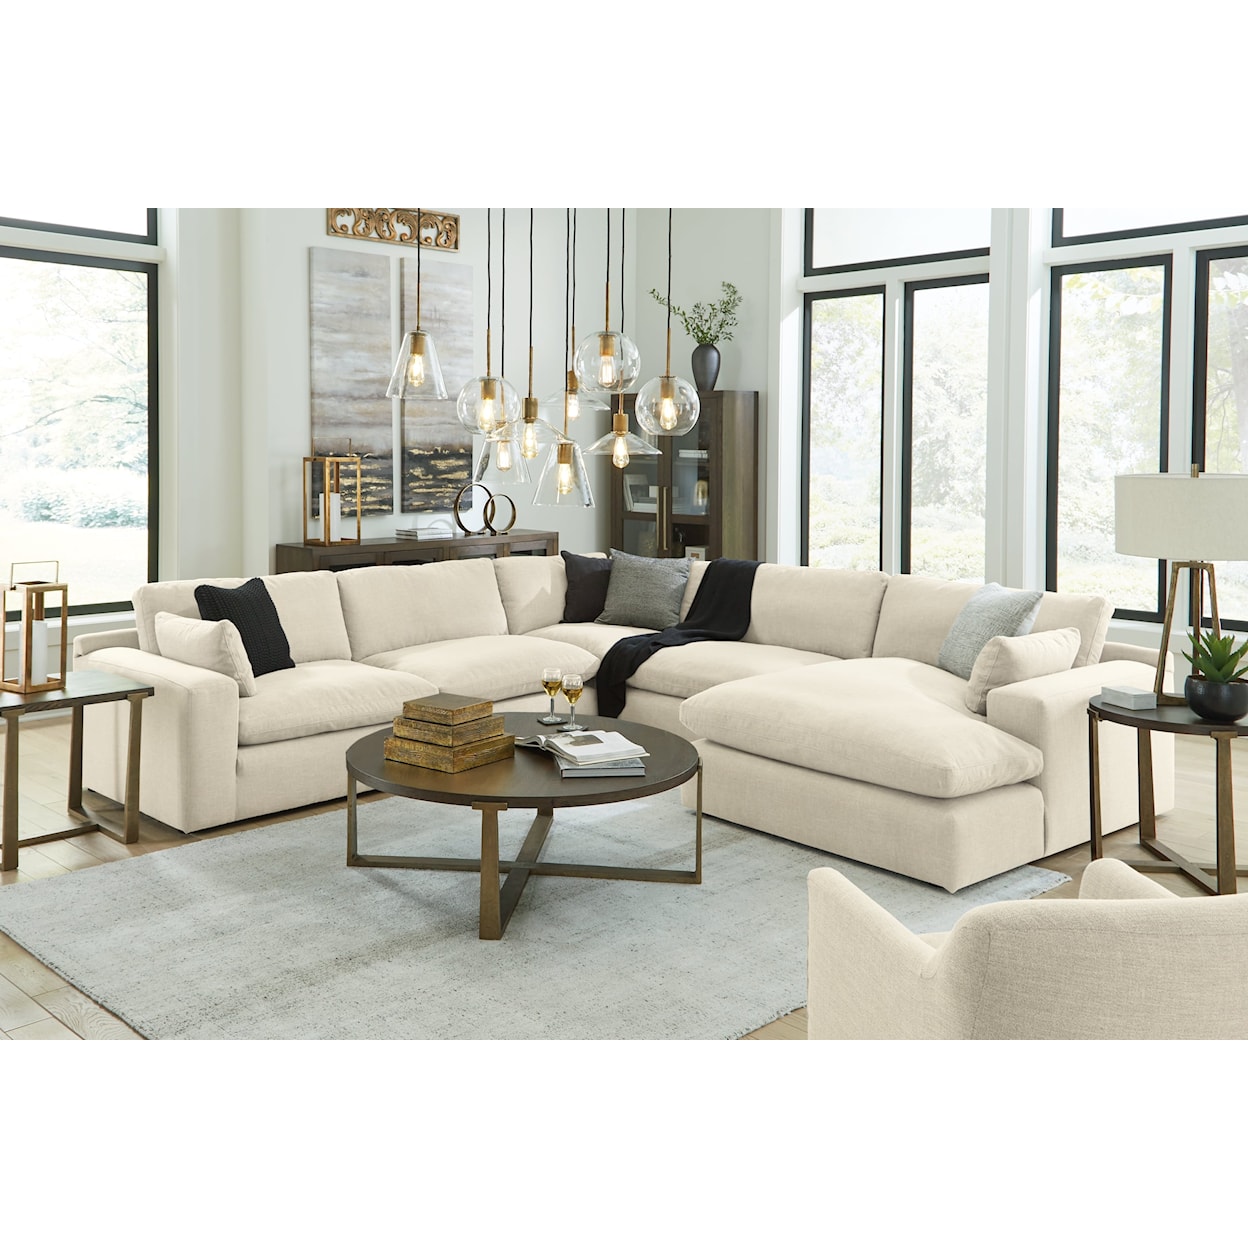 Benchcraft by Ashley Elyza 5-Piece Modular Sectional with Chaise